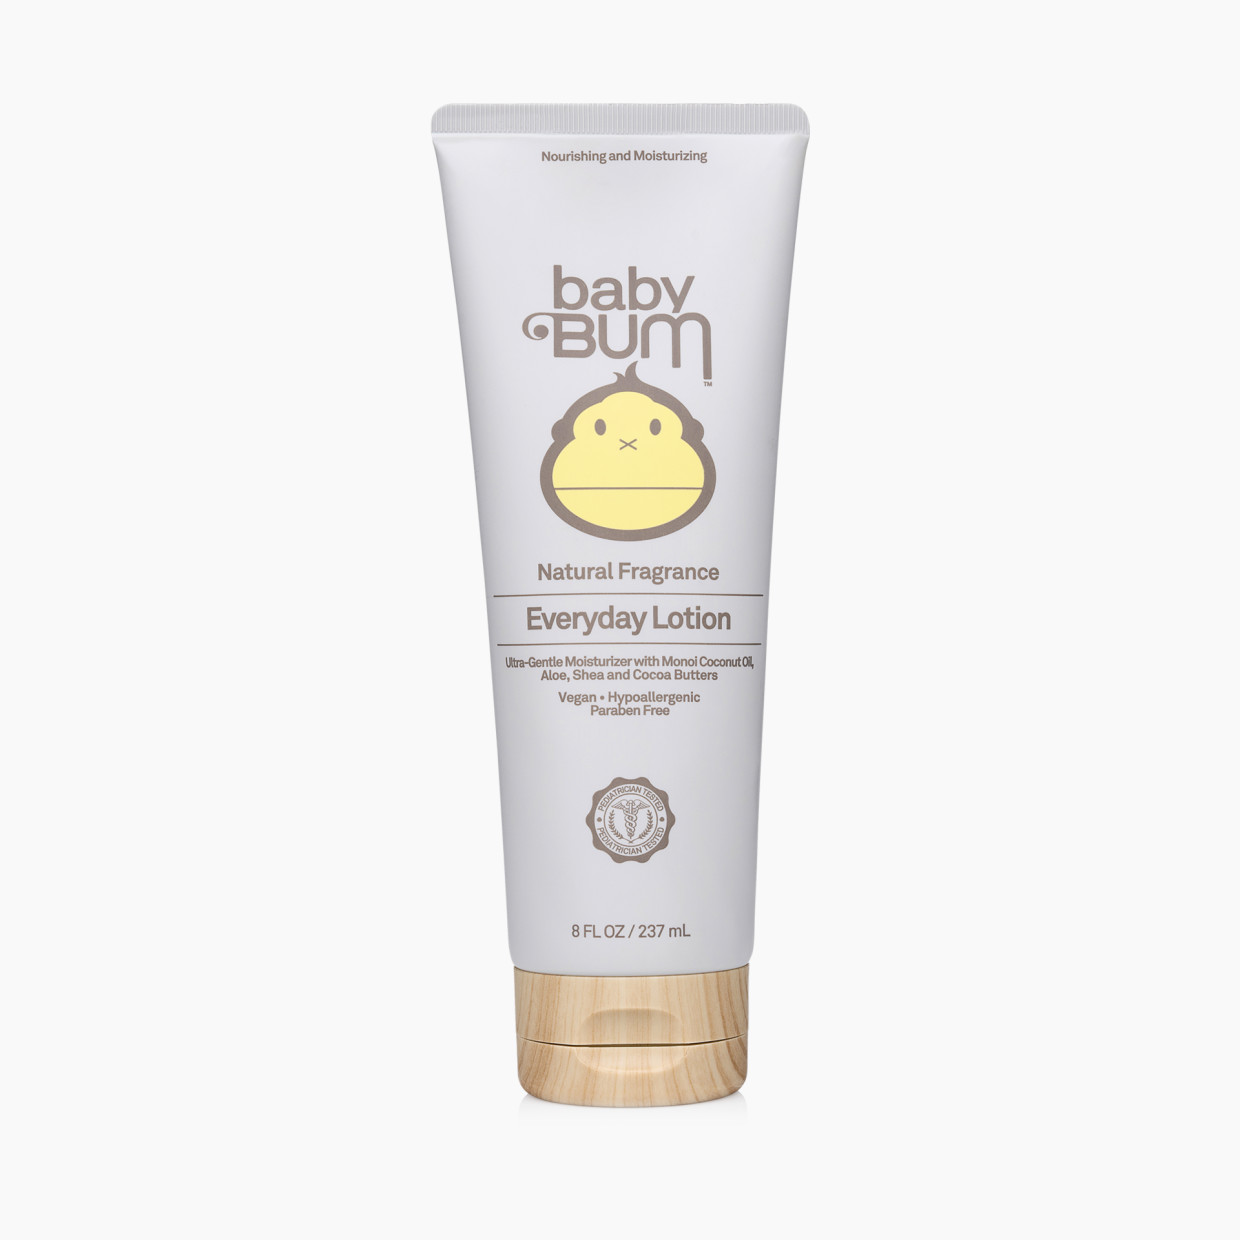 Baby Bum Everyday Lotion - Natural Fragrance, 8 Fl Oz.